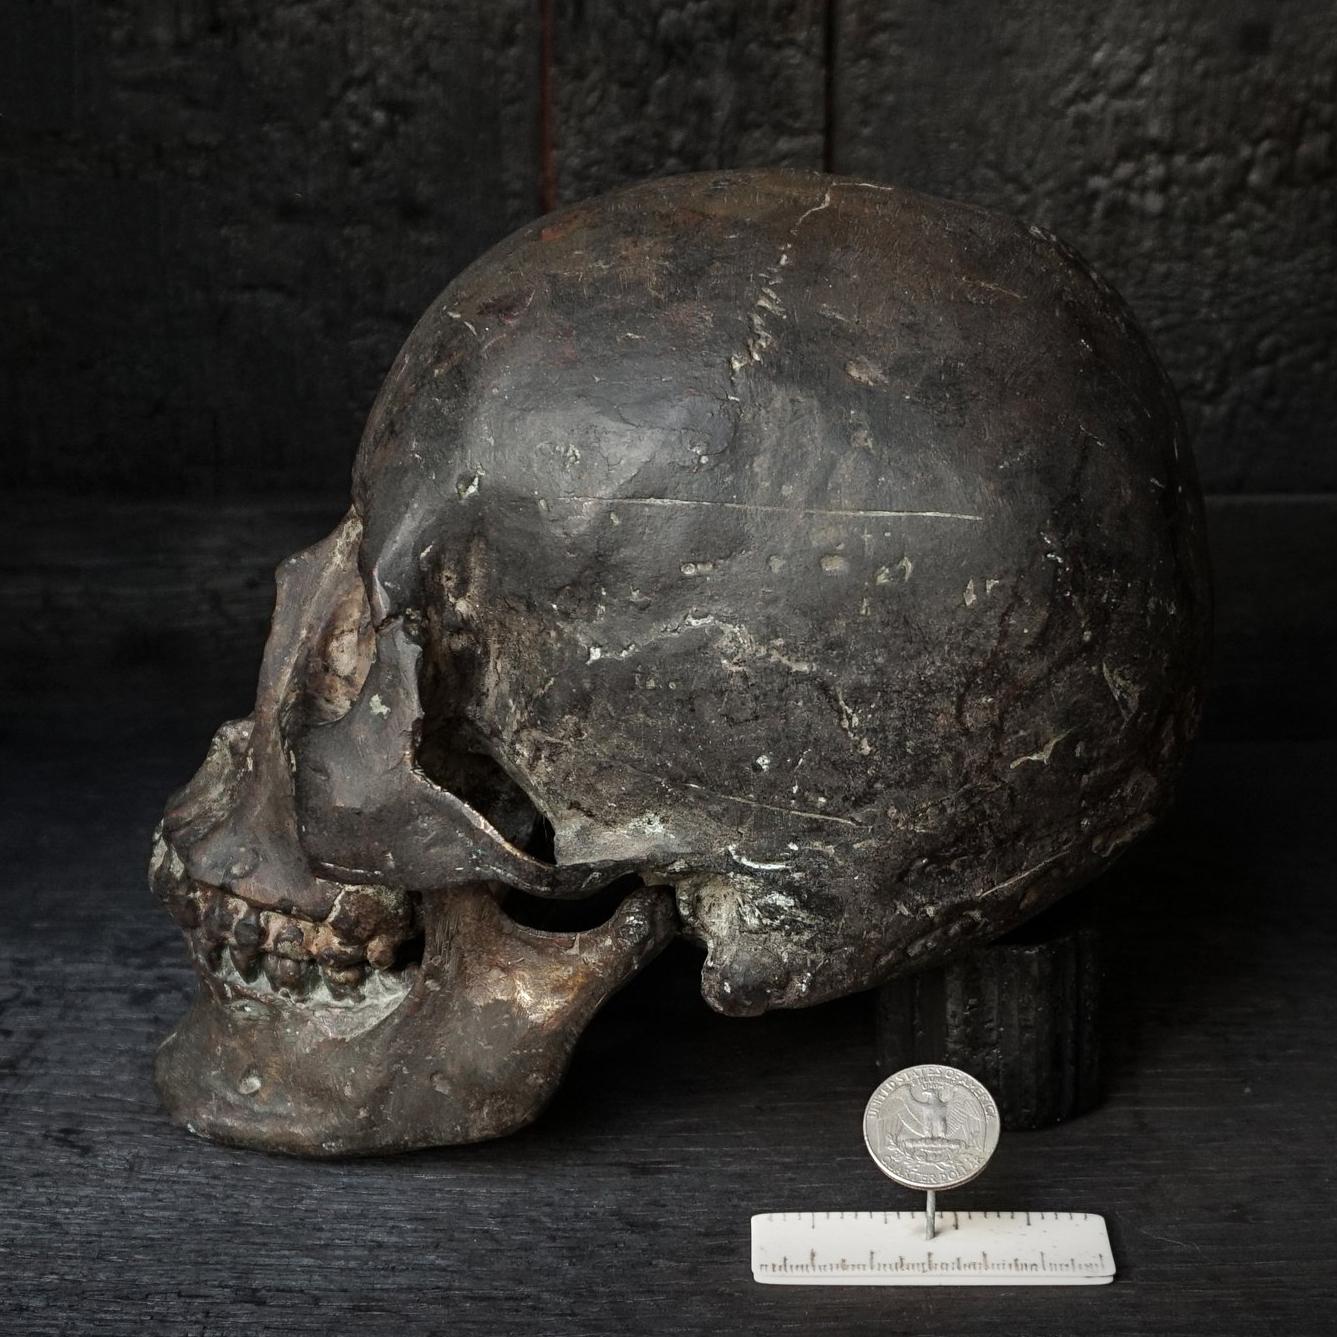 Authentic heavy and rare raw casting in bronze of a human skull, complete with lower and higher jaws. 
This skull vanity (or vanitas) could be seen as a 'memento mori' to remind people of their mortality. The model was made from a real human skull.